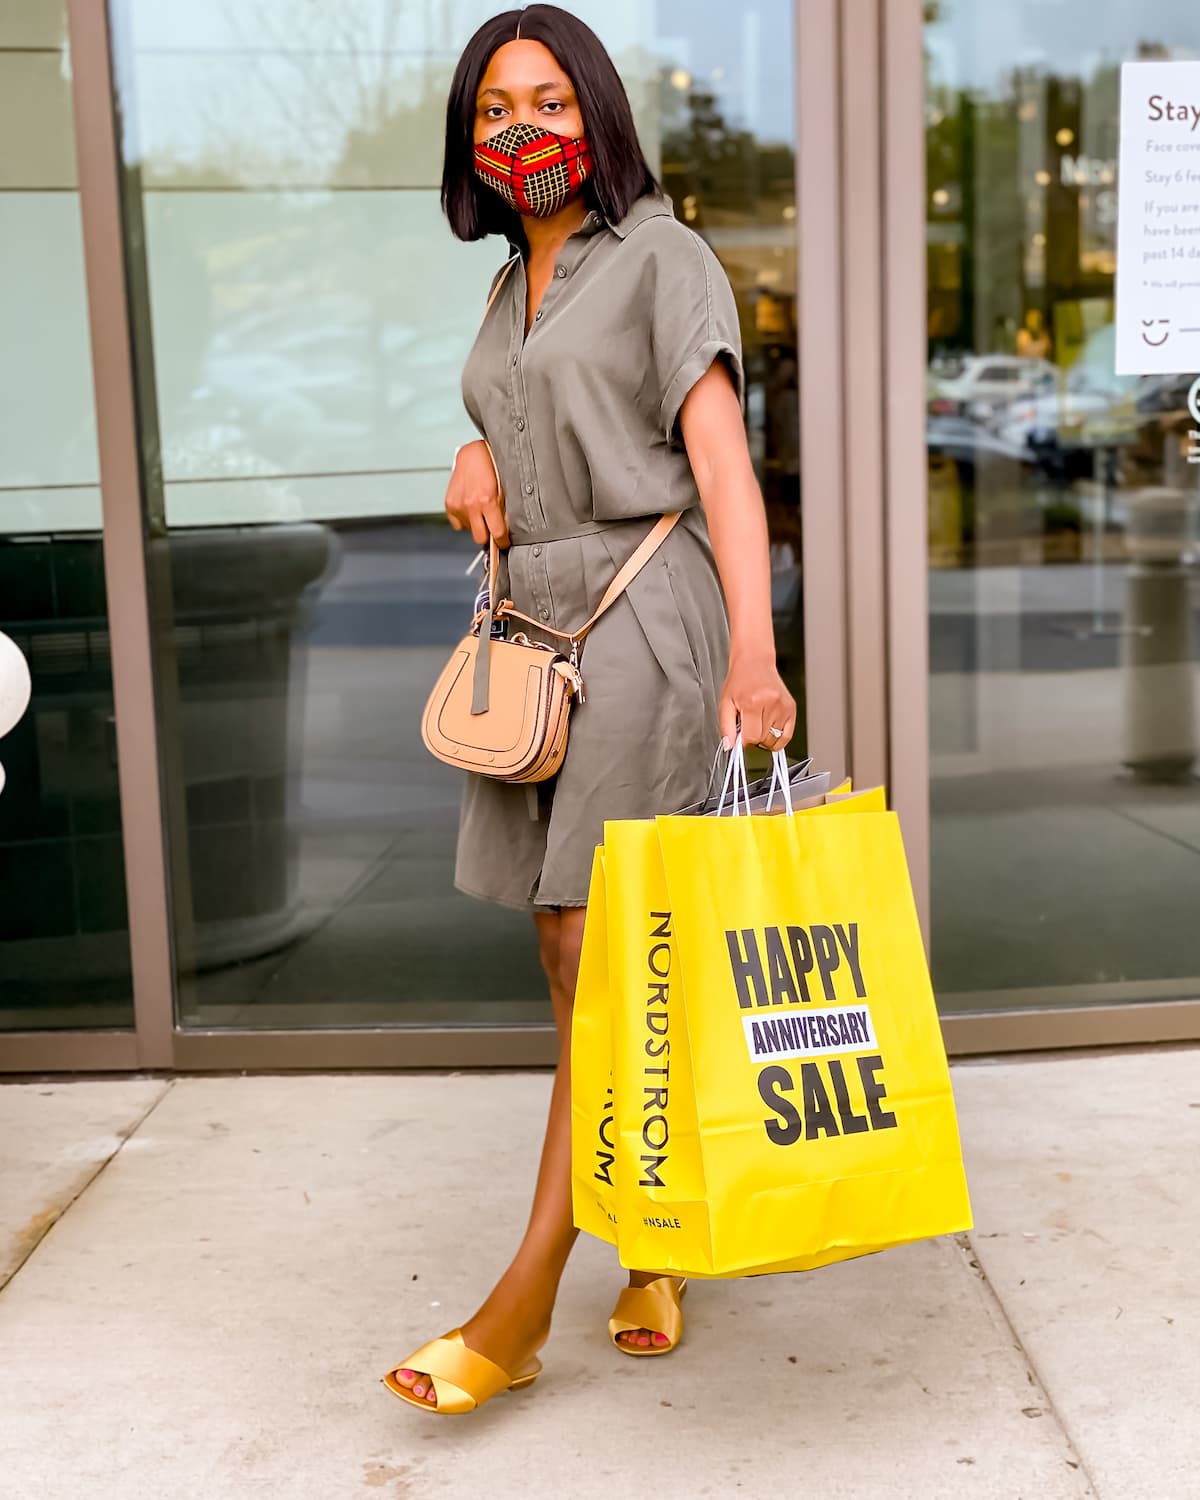 This is YOUR sneak peek into the 2021 Nordstrom Anniversary Sale, including important dates, best products for women, men, kids, and babies, restocks and a prediction of products with highest sell out risks!